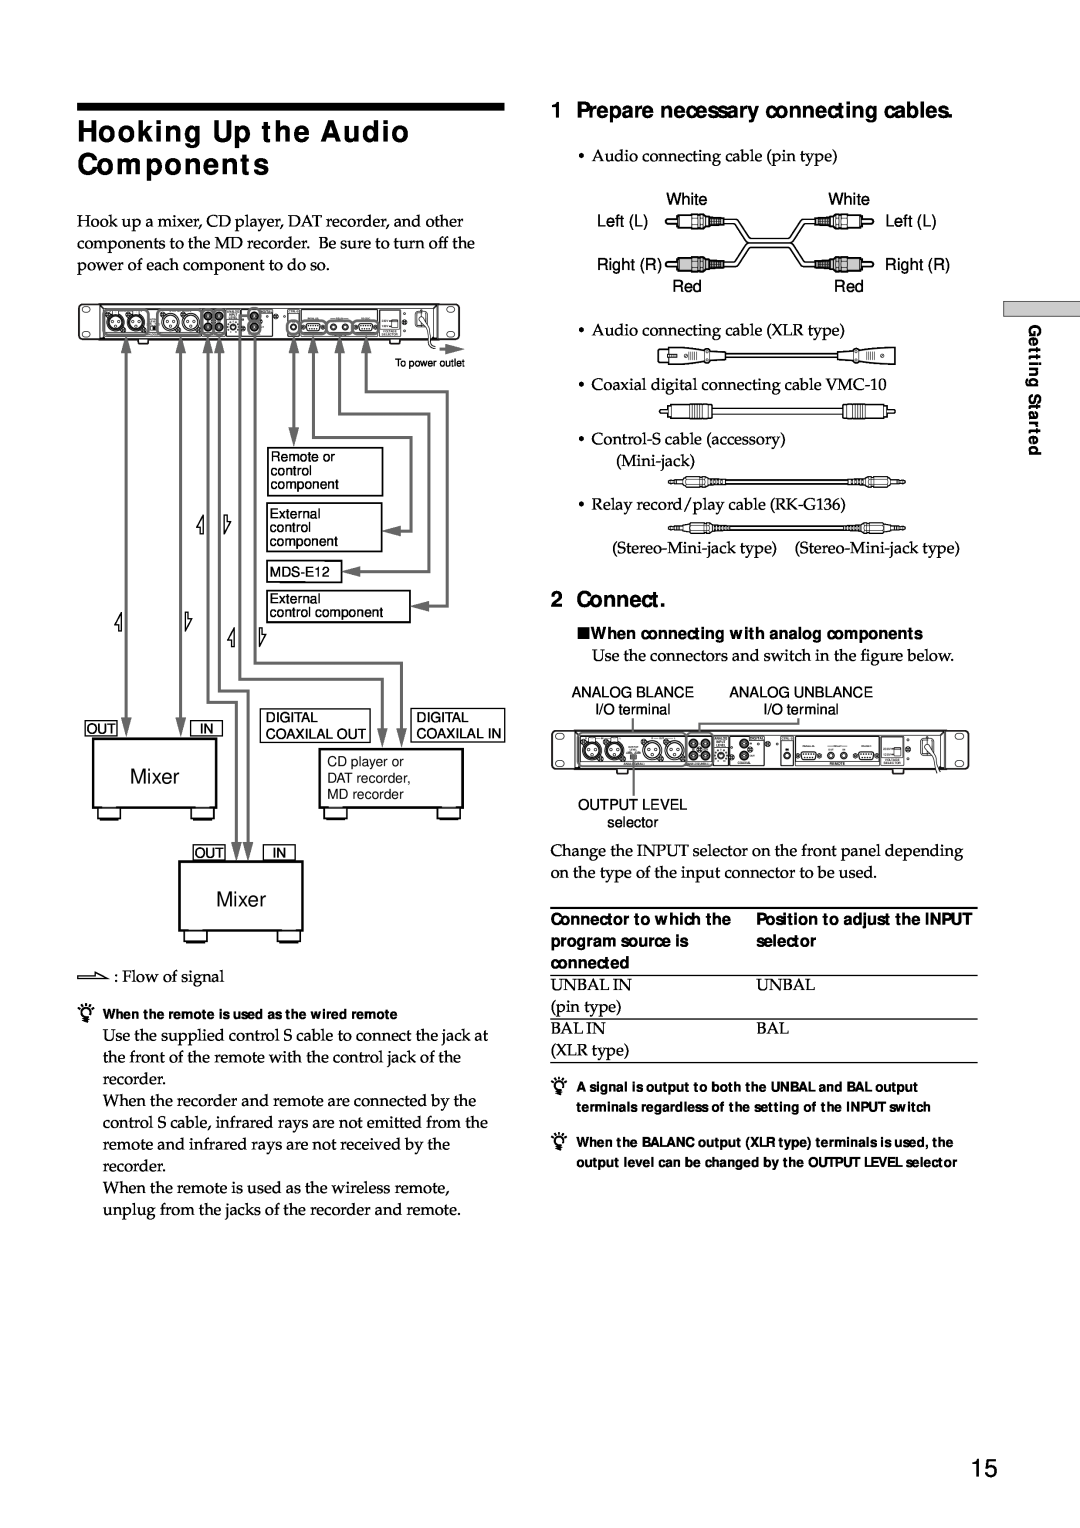 Sony MDS-E12 operating instructions Hooking Up the Audio Components, 1Prepare necessary connecting cables, 2Connect, Mixer 